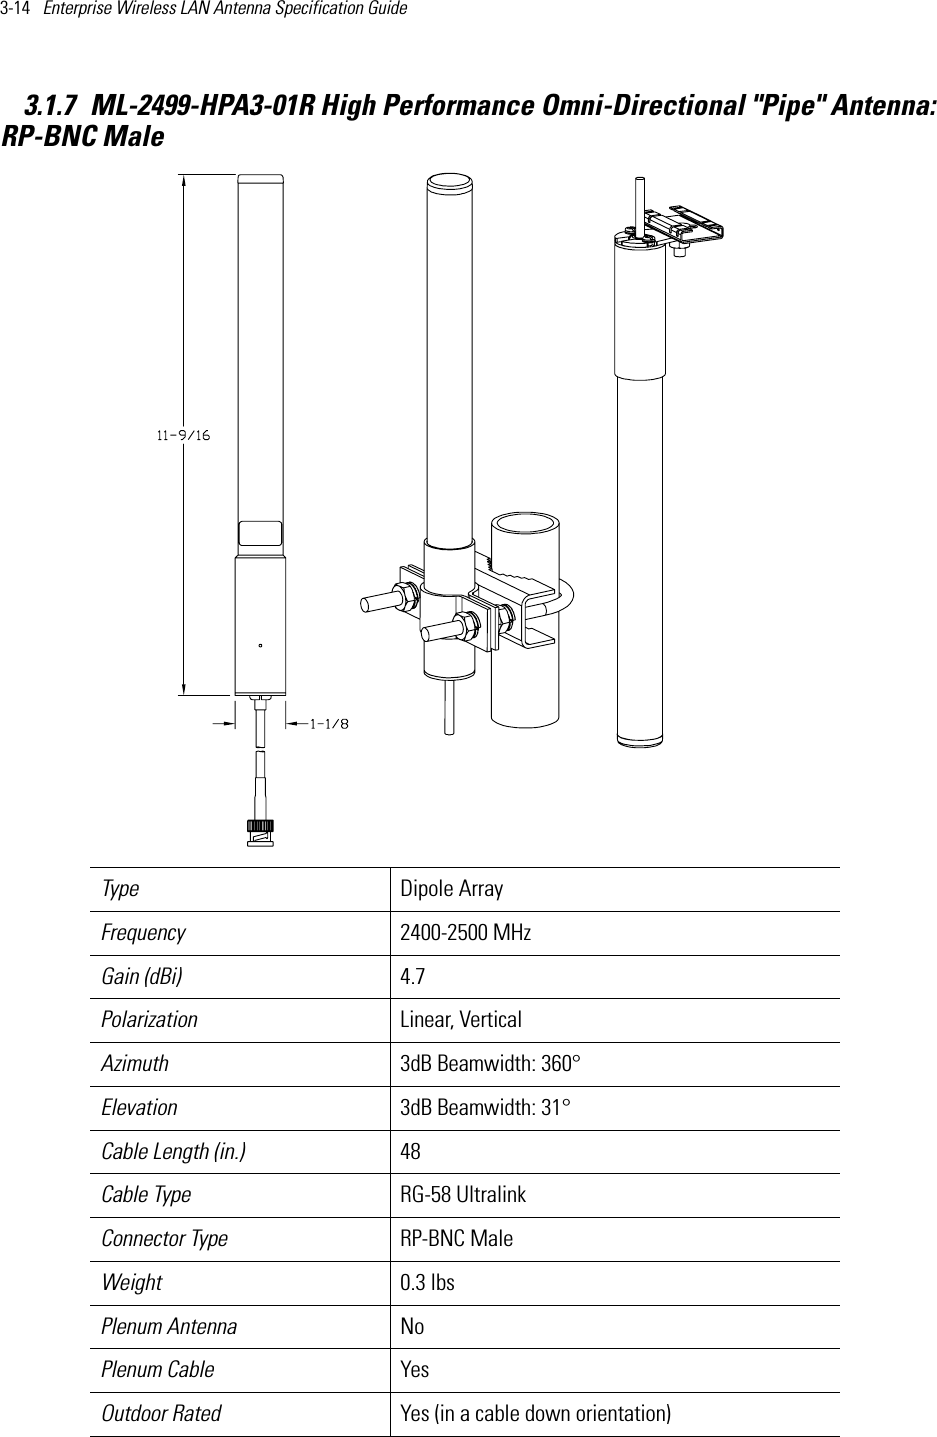 3-14   Enterprise Wireless LAN Antenna Specification Guide 3.1.7 ML-2499-HPA3-01R High Performance Omni-Directional &quot;Pipe&quot; Antenna:RP-BNC MaleType Dipole Array Frequency 2400-2500 MHzGain (dBi) 4.7Polarization Linear, VerticalAzimuth 3dB Beamwidth: 360°Elevation 3dB Beamwidth: 31°Cable Length (in.) 48Cable Type RG-58 UltralinkConnector Type RP-BNC Male Weight 0.3 lbsPlenum Antenna No Plenum Cable YesOutdoor Rated Yes (in a cable down orientation)     